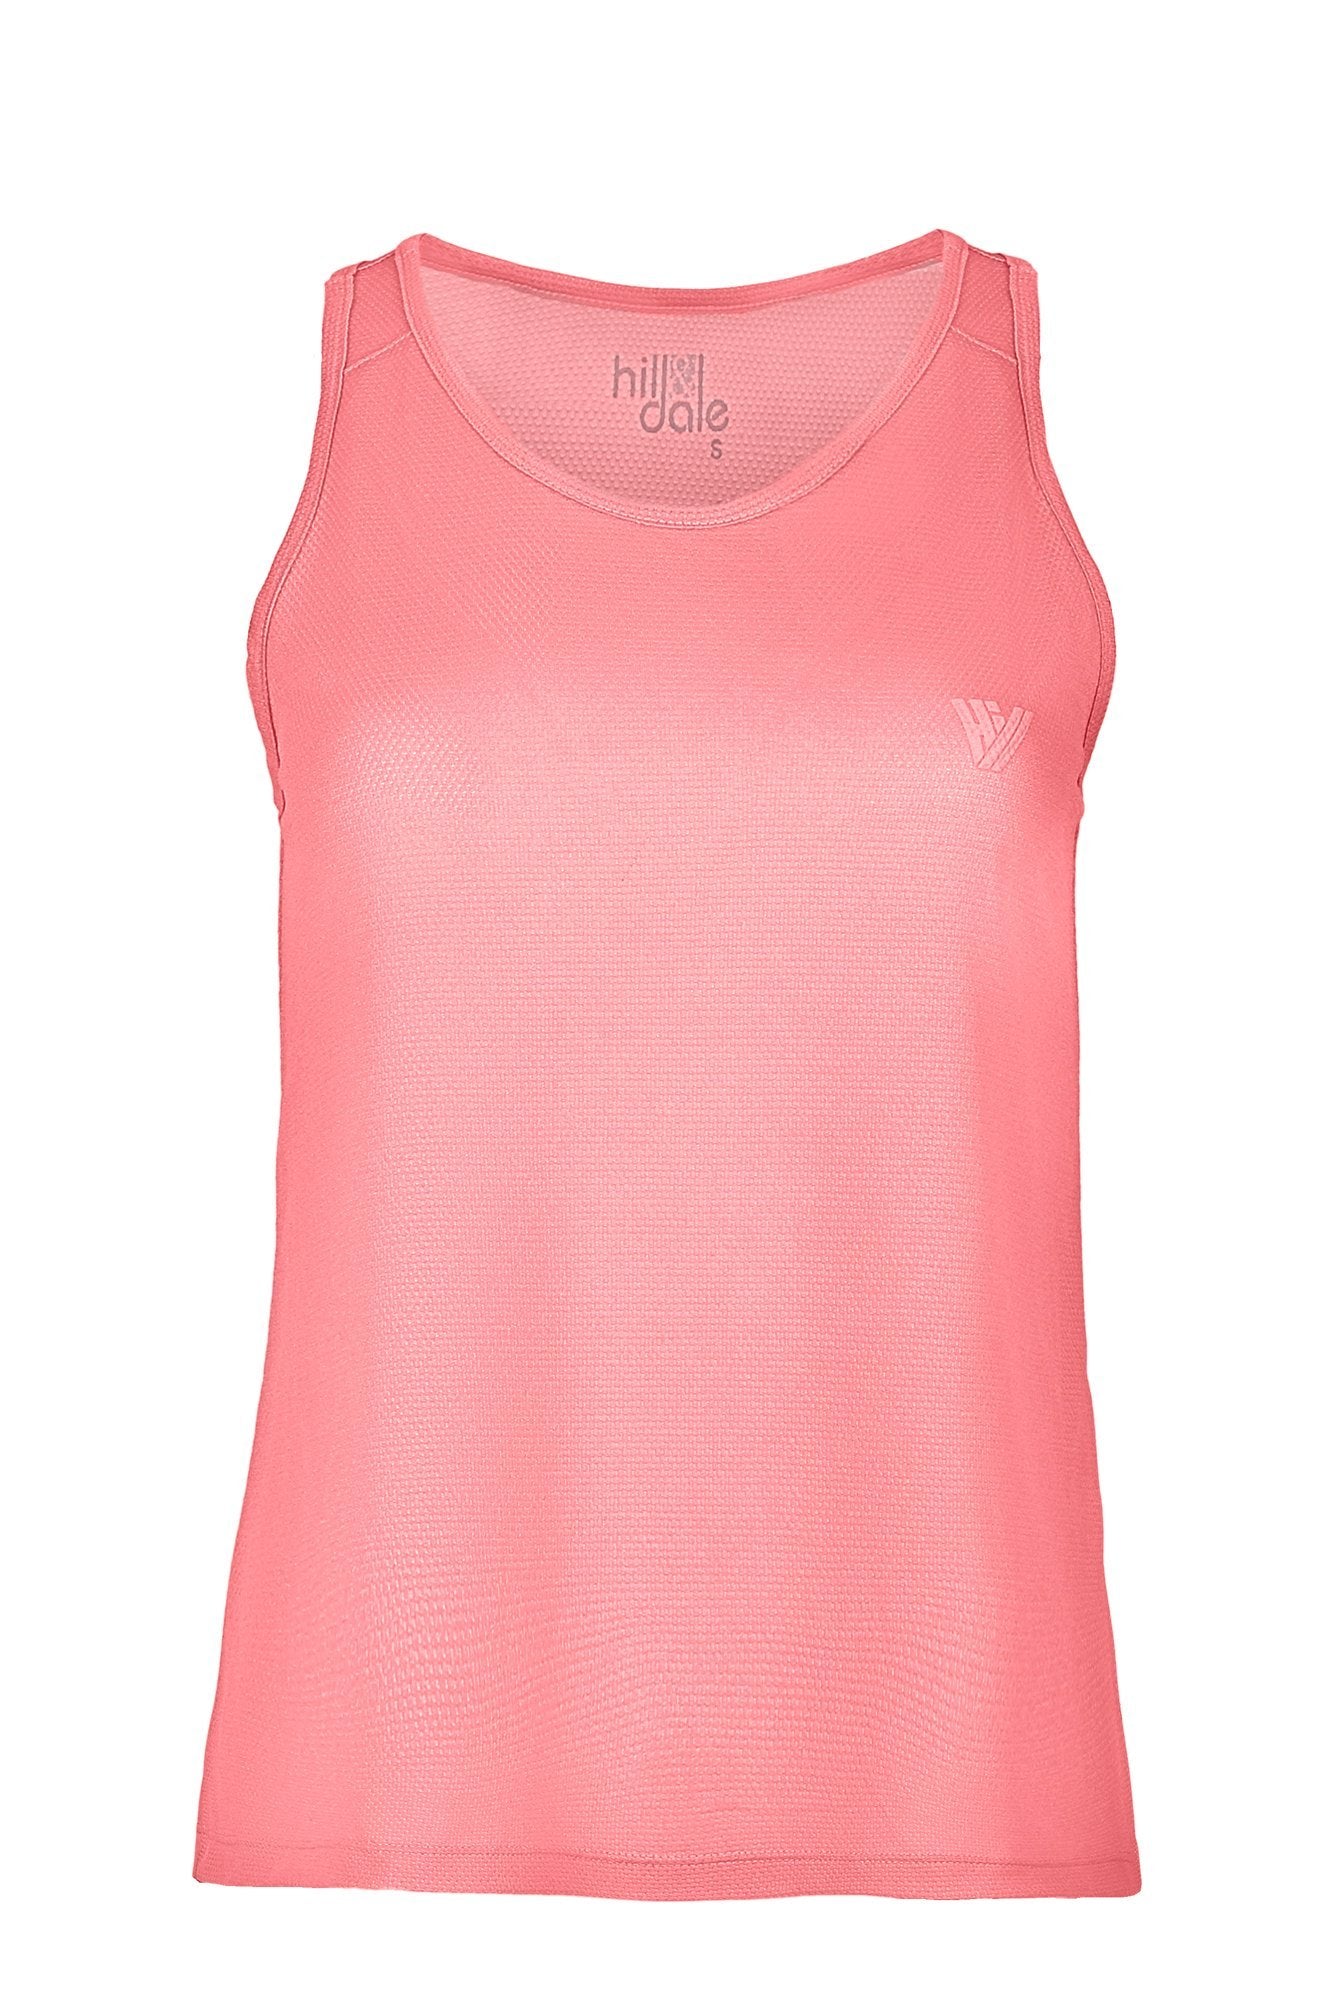 hill & dale run singlet top hill & dale pink XS 100% Polyester